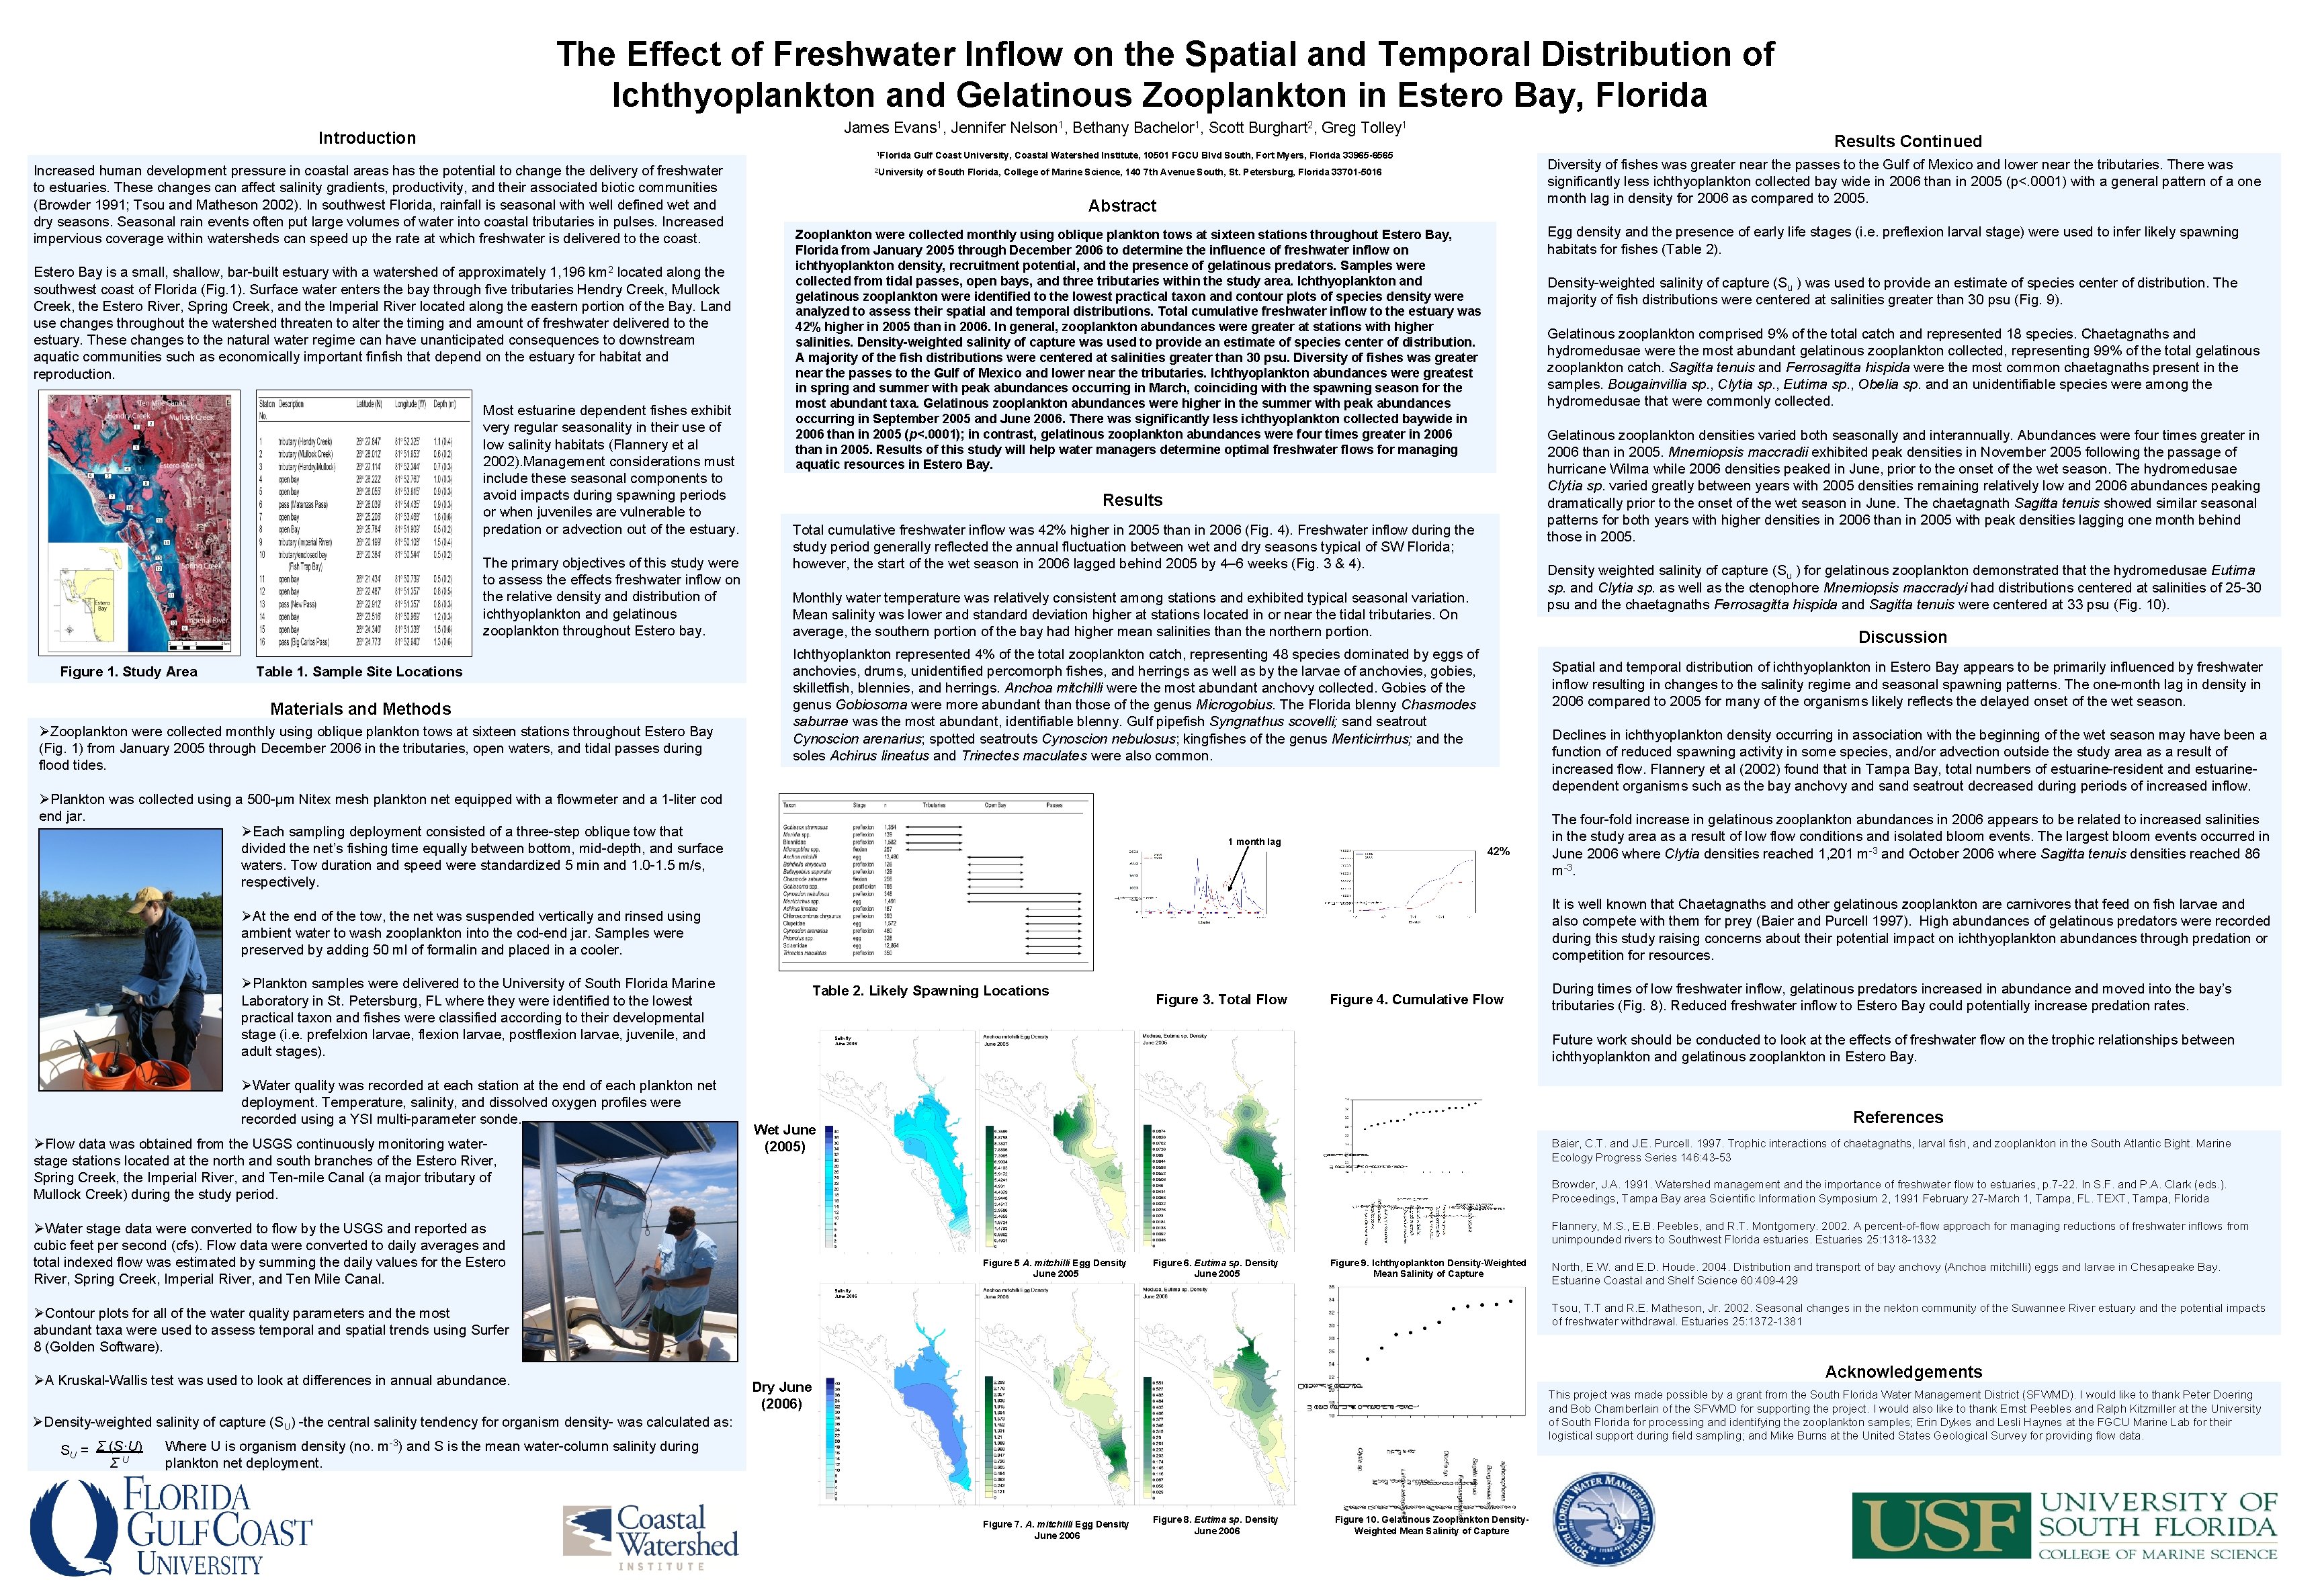 The Effect of Freshwater Inflow on the Spatial and Temporal Distribution of Ichthyoplankton and